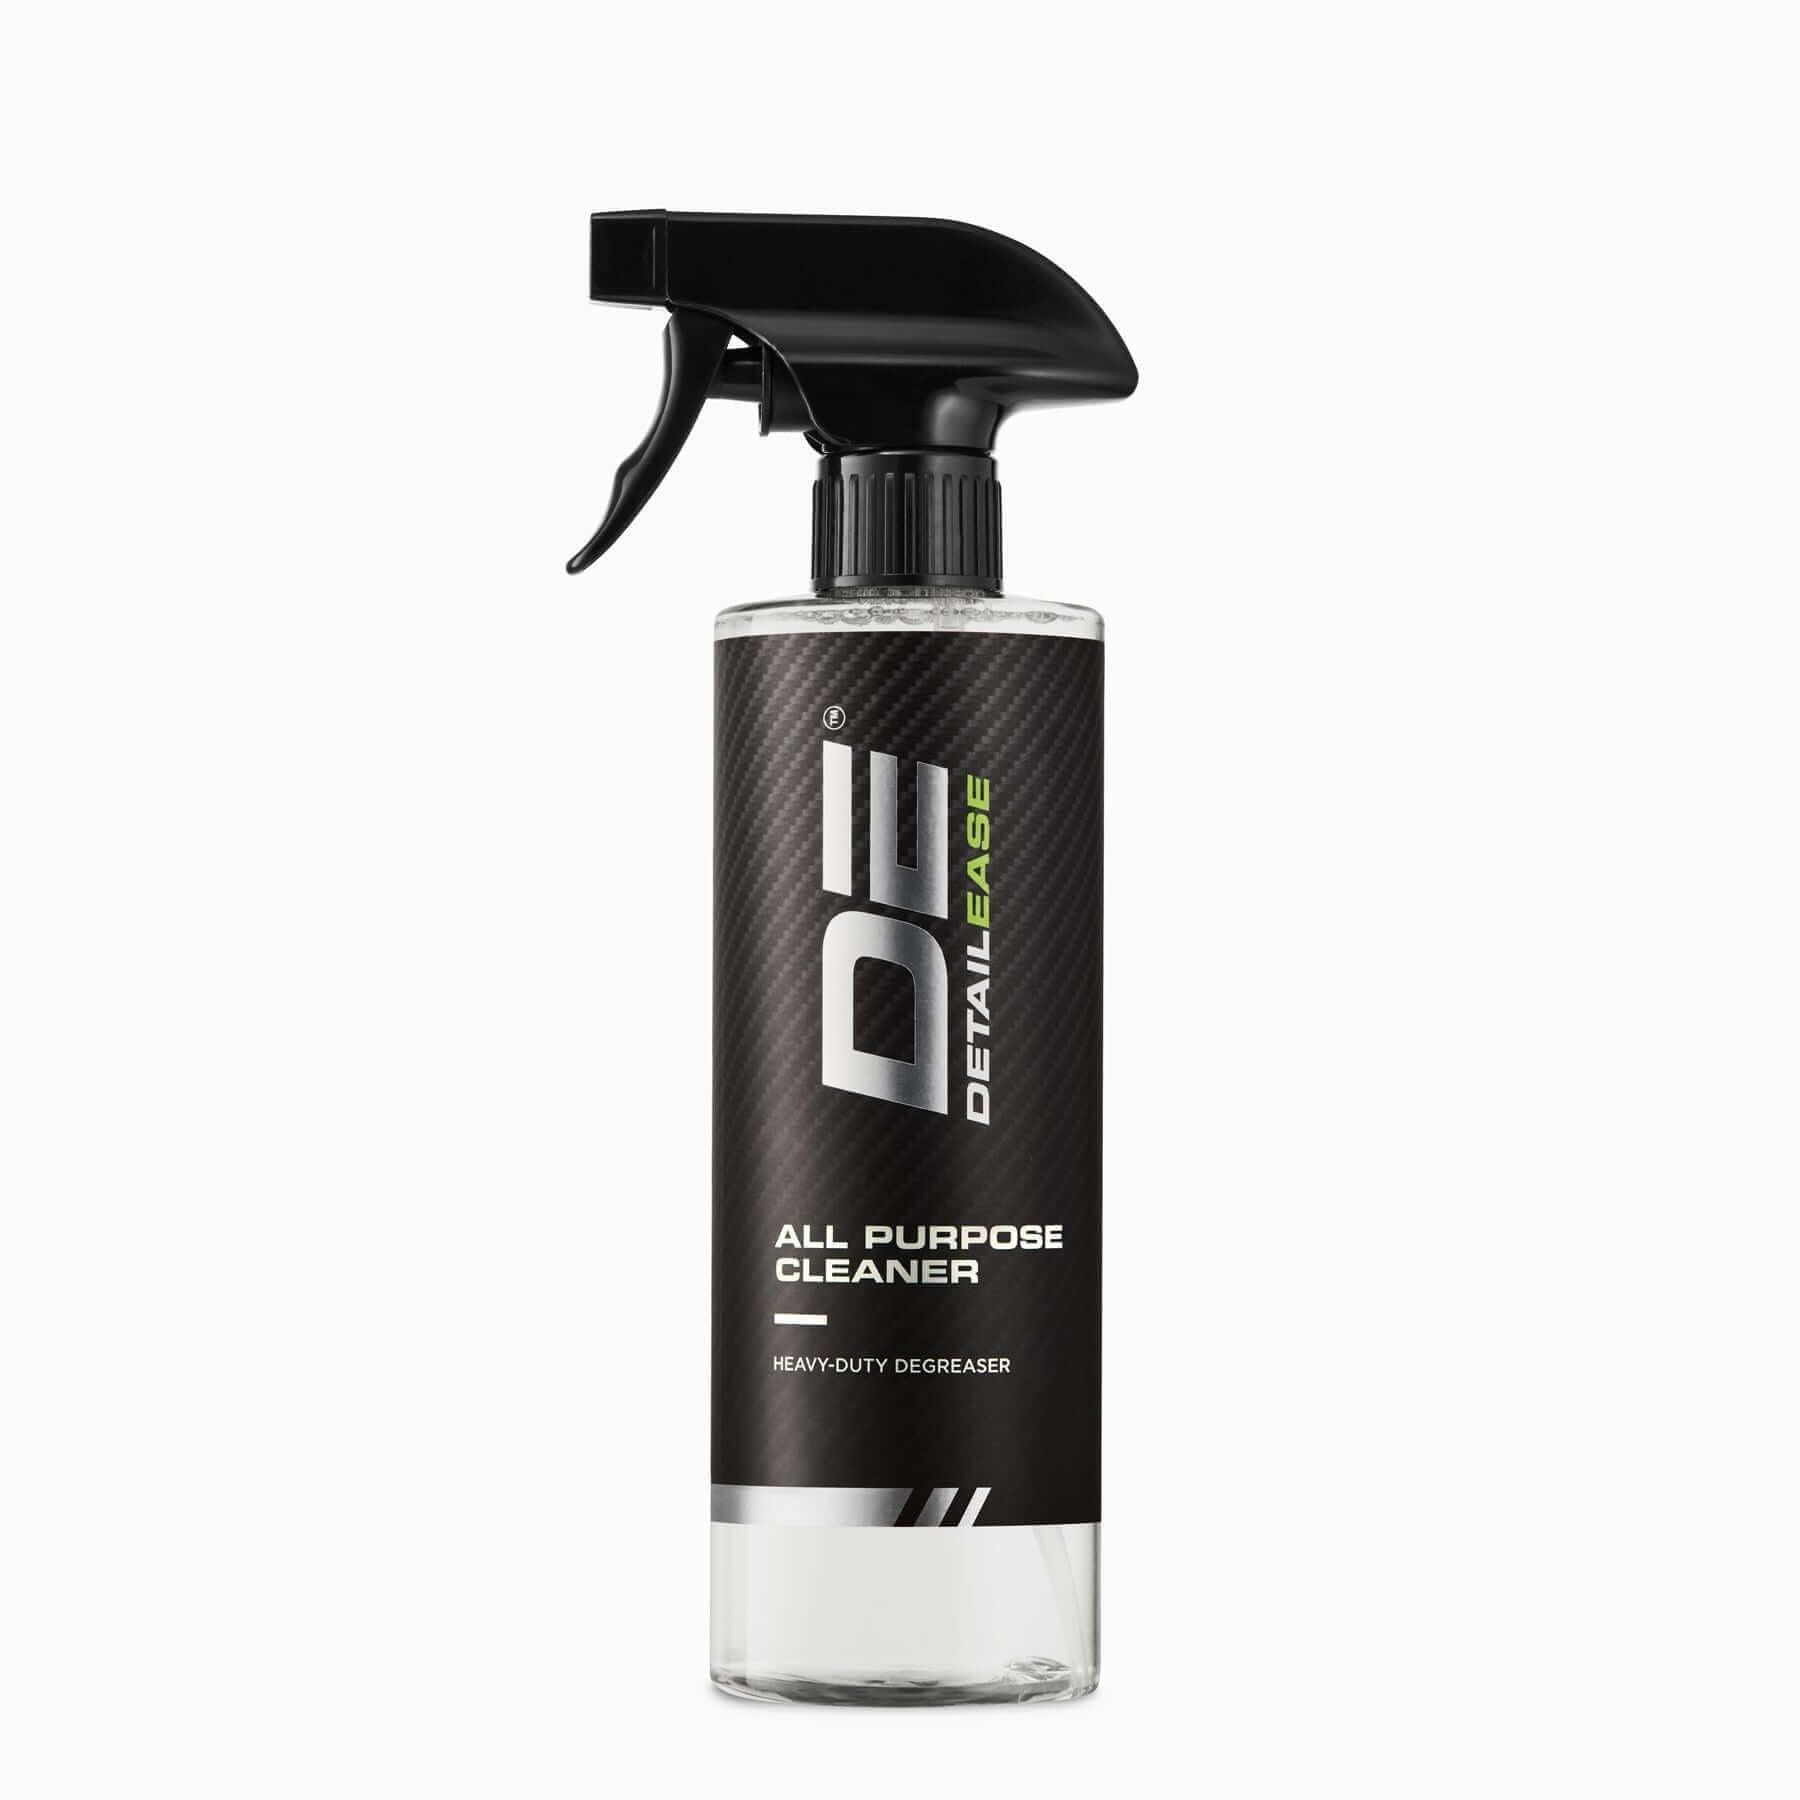 Detail Ease | Detail Ease All Purpose Cleaner - Heavy Duty Degreaser at R 149.95